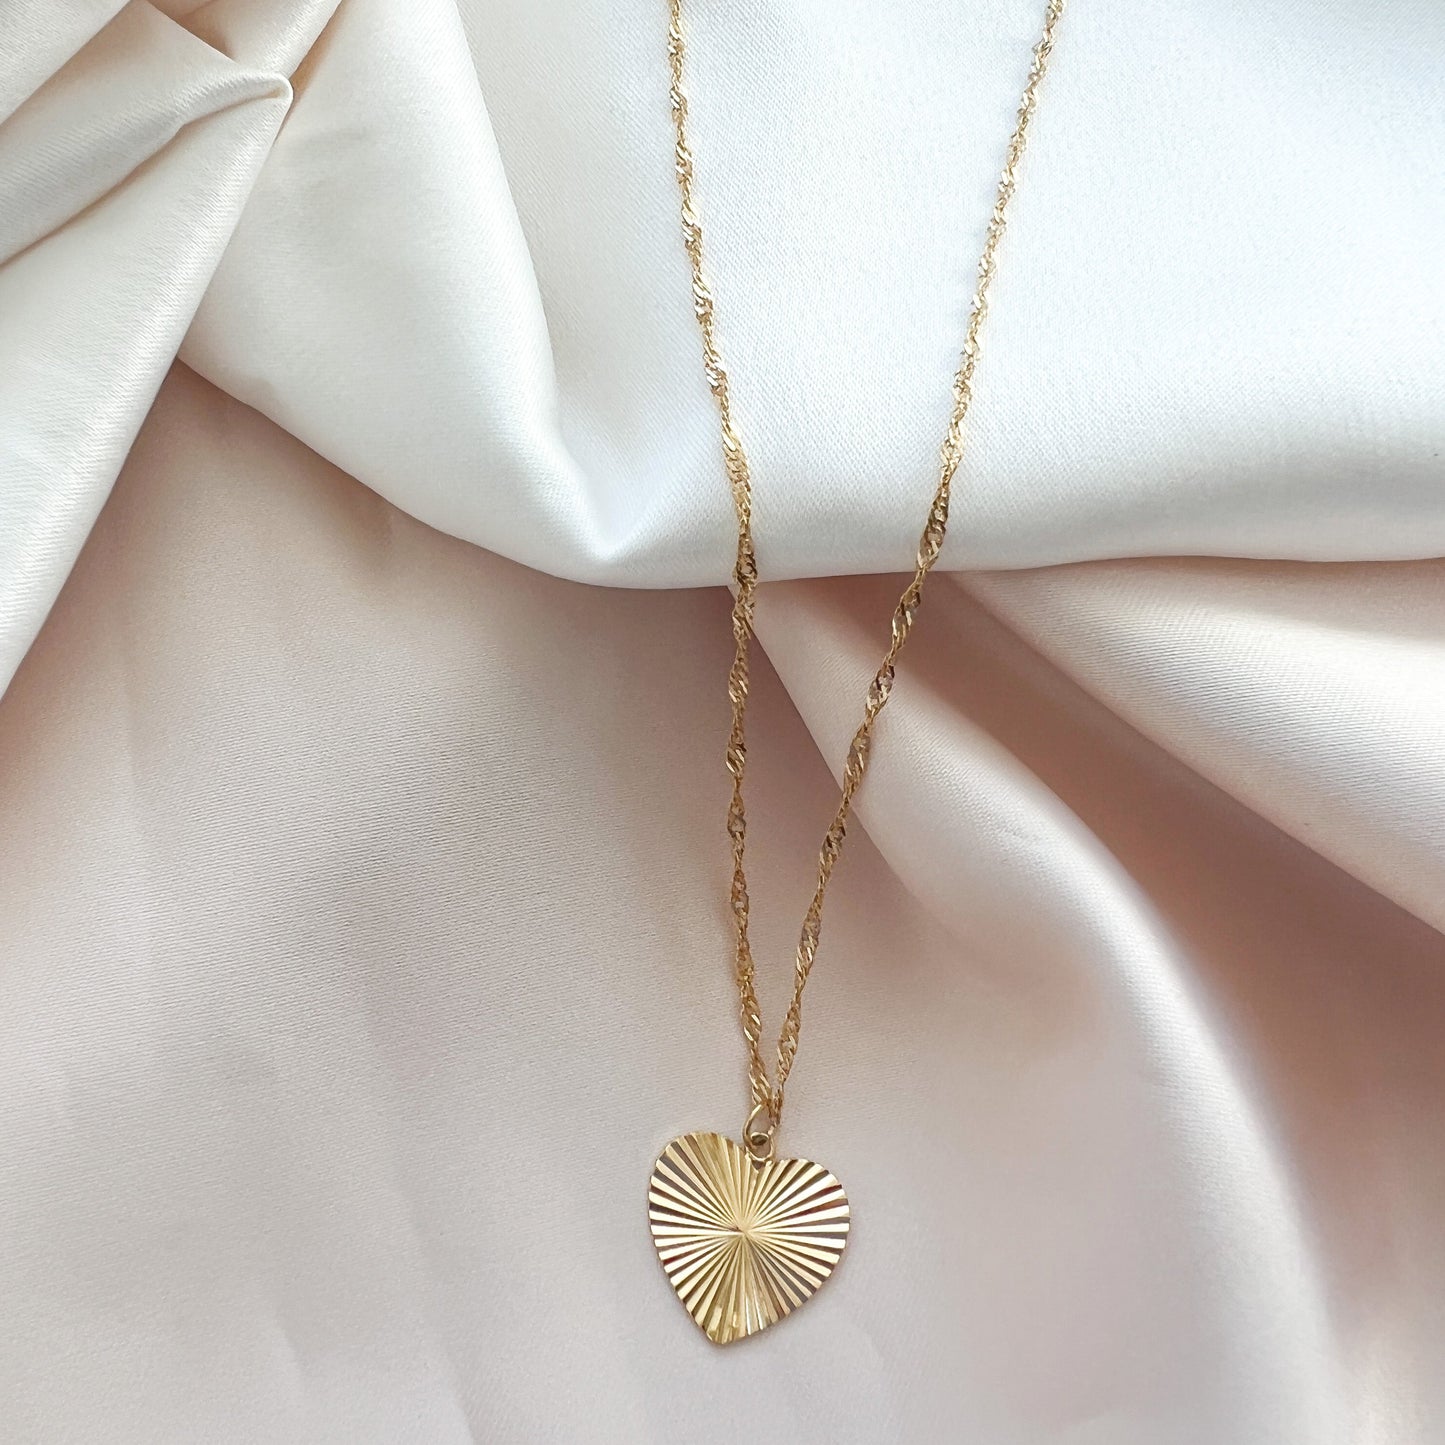 Trendy Gold Heart Pendant Necklace from Alexandra Marks Jewelry